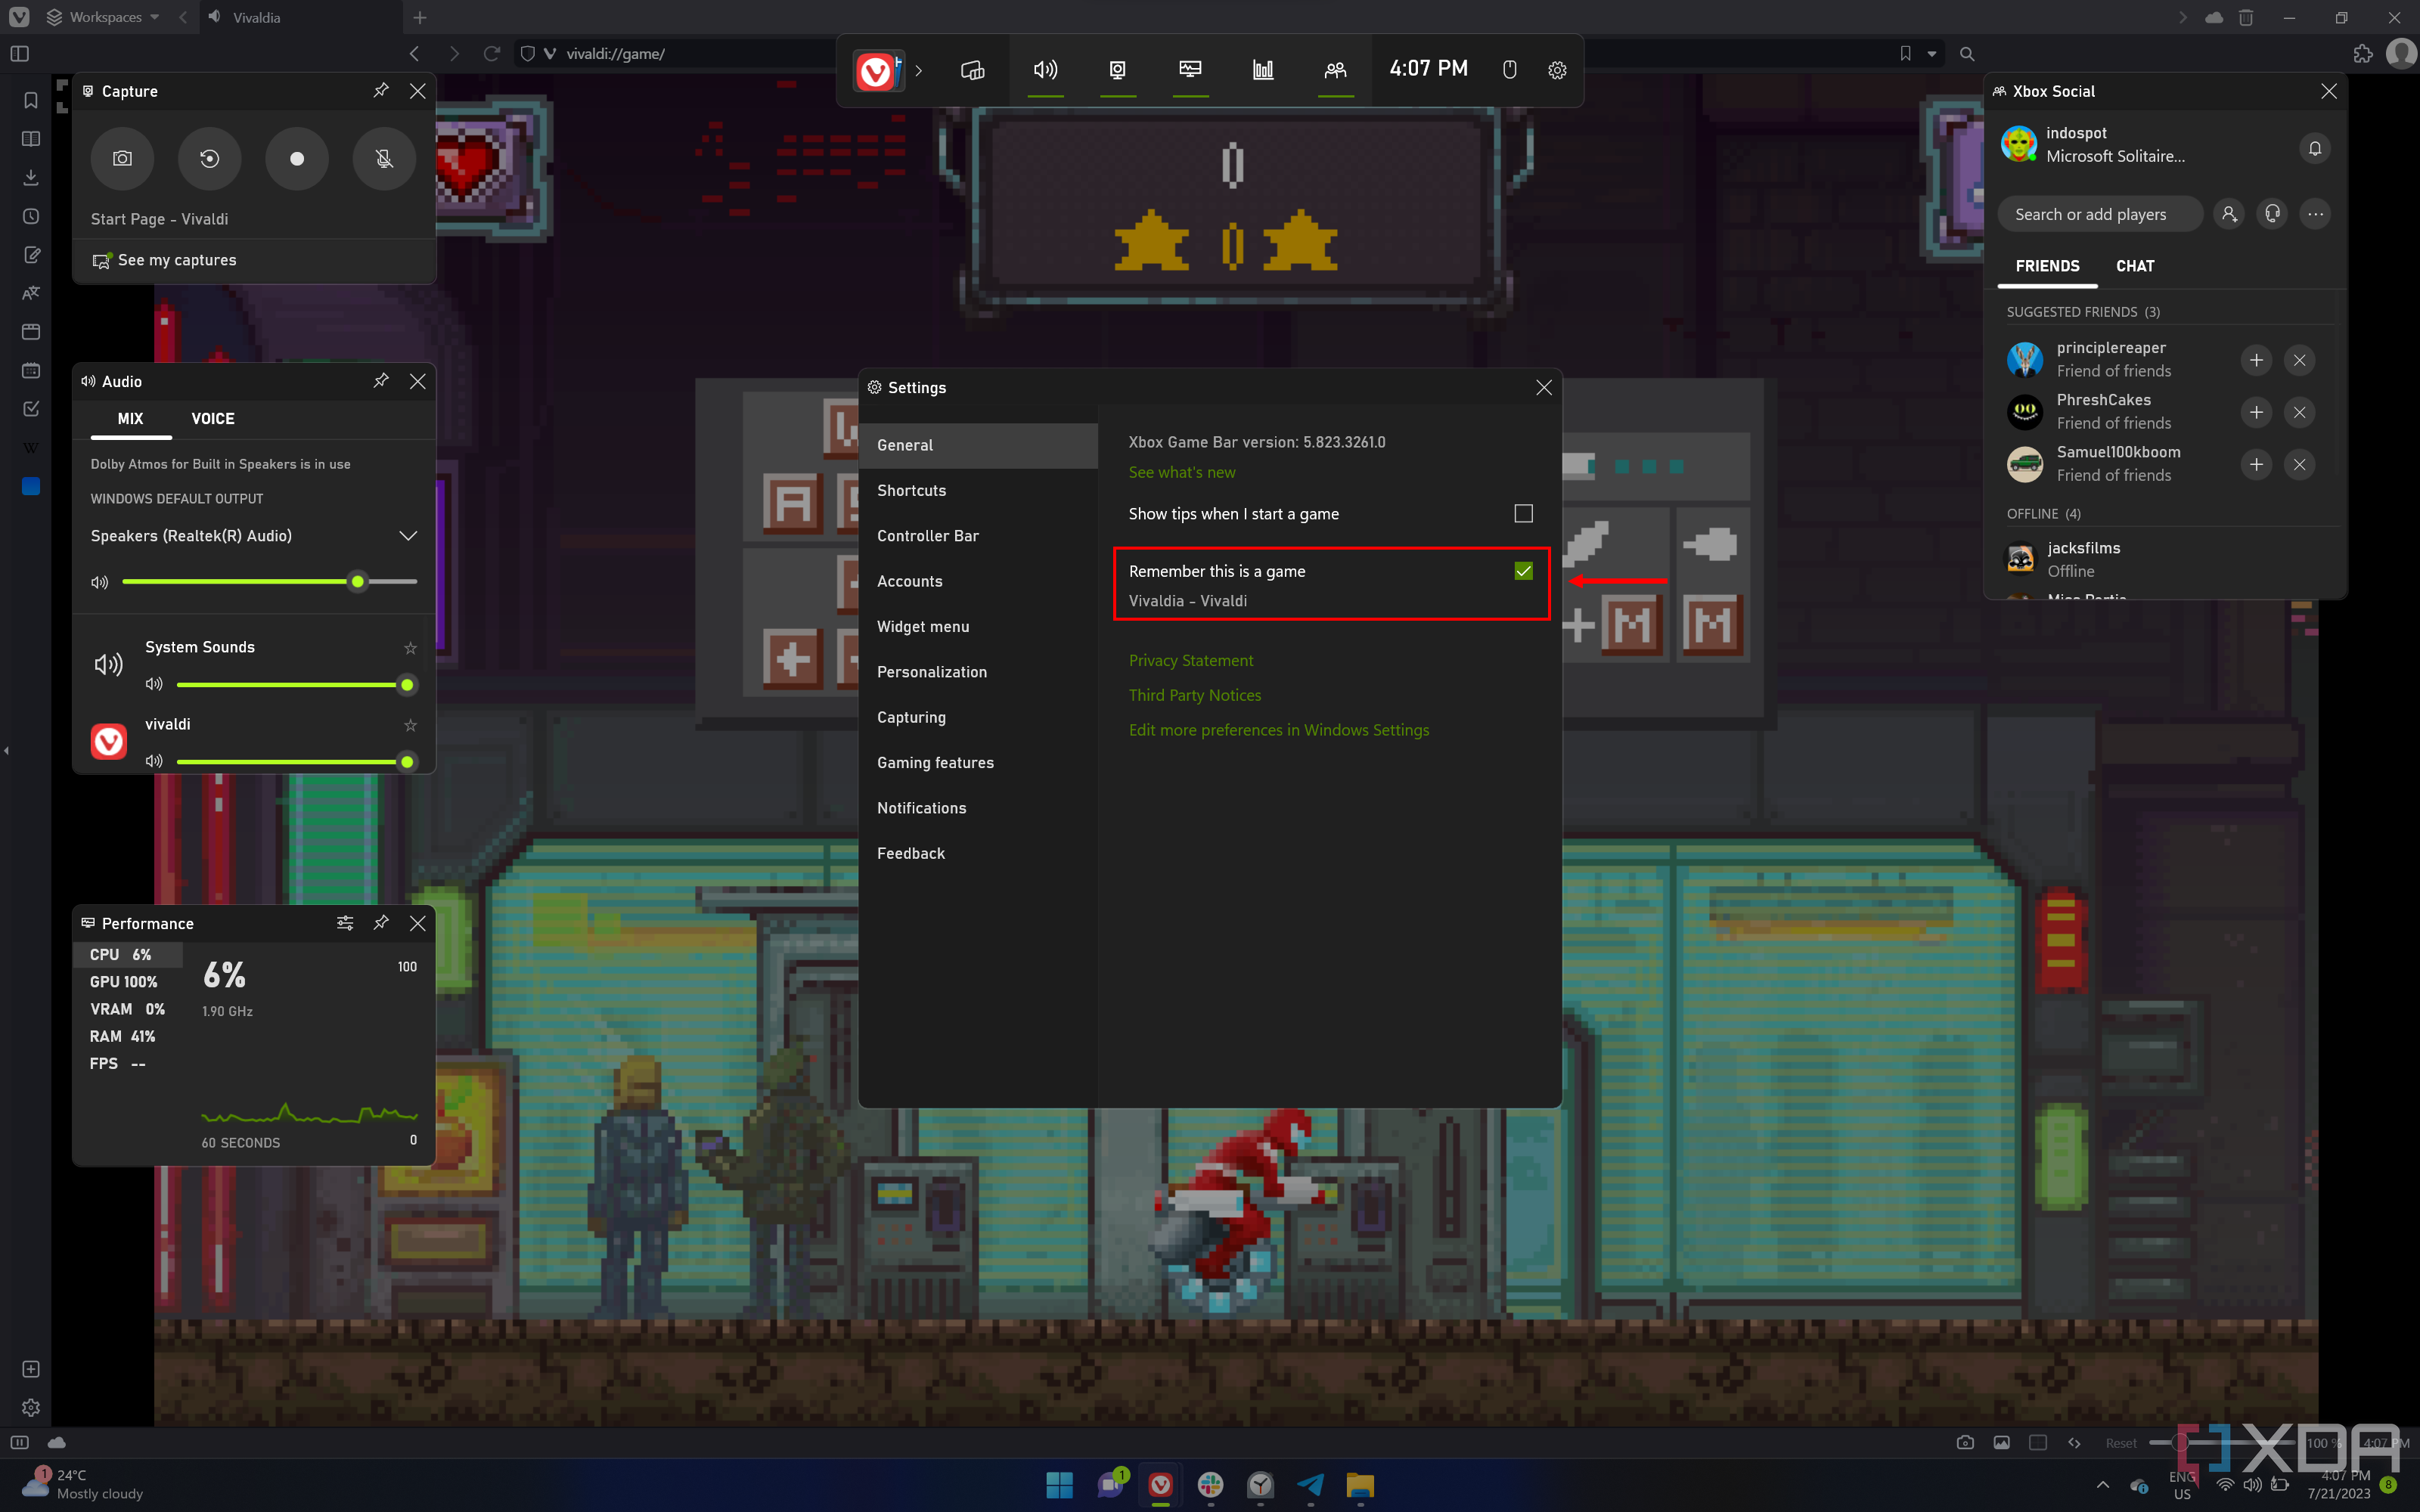 Screenshot of the game bar UI showing the general settings page with the option to remember the current active app as a game enabled.